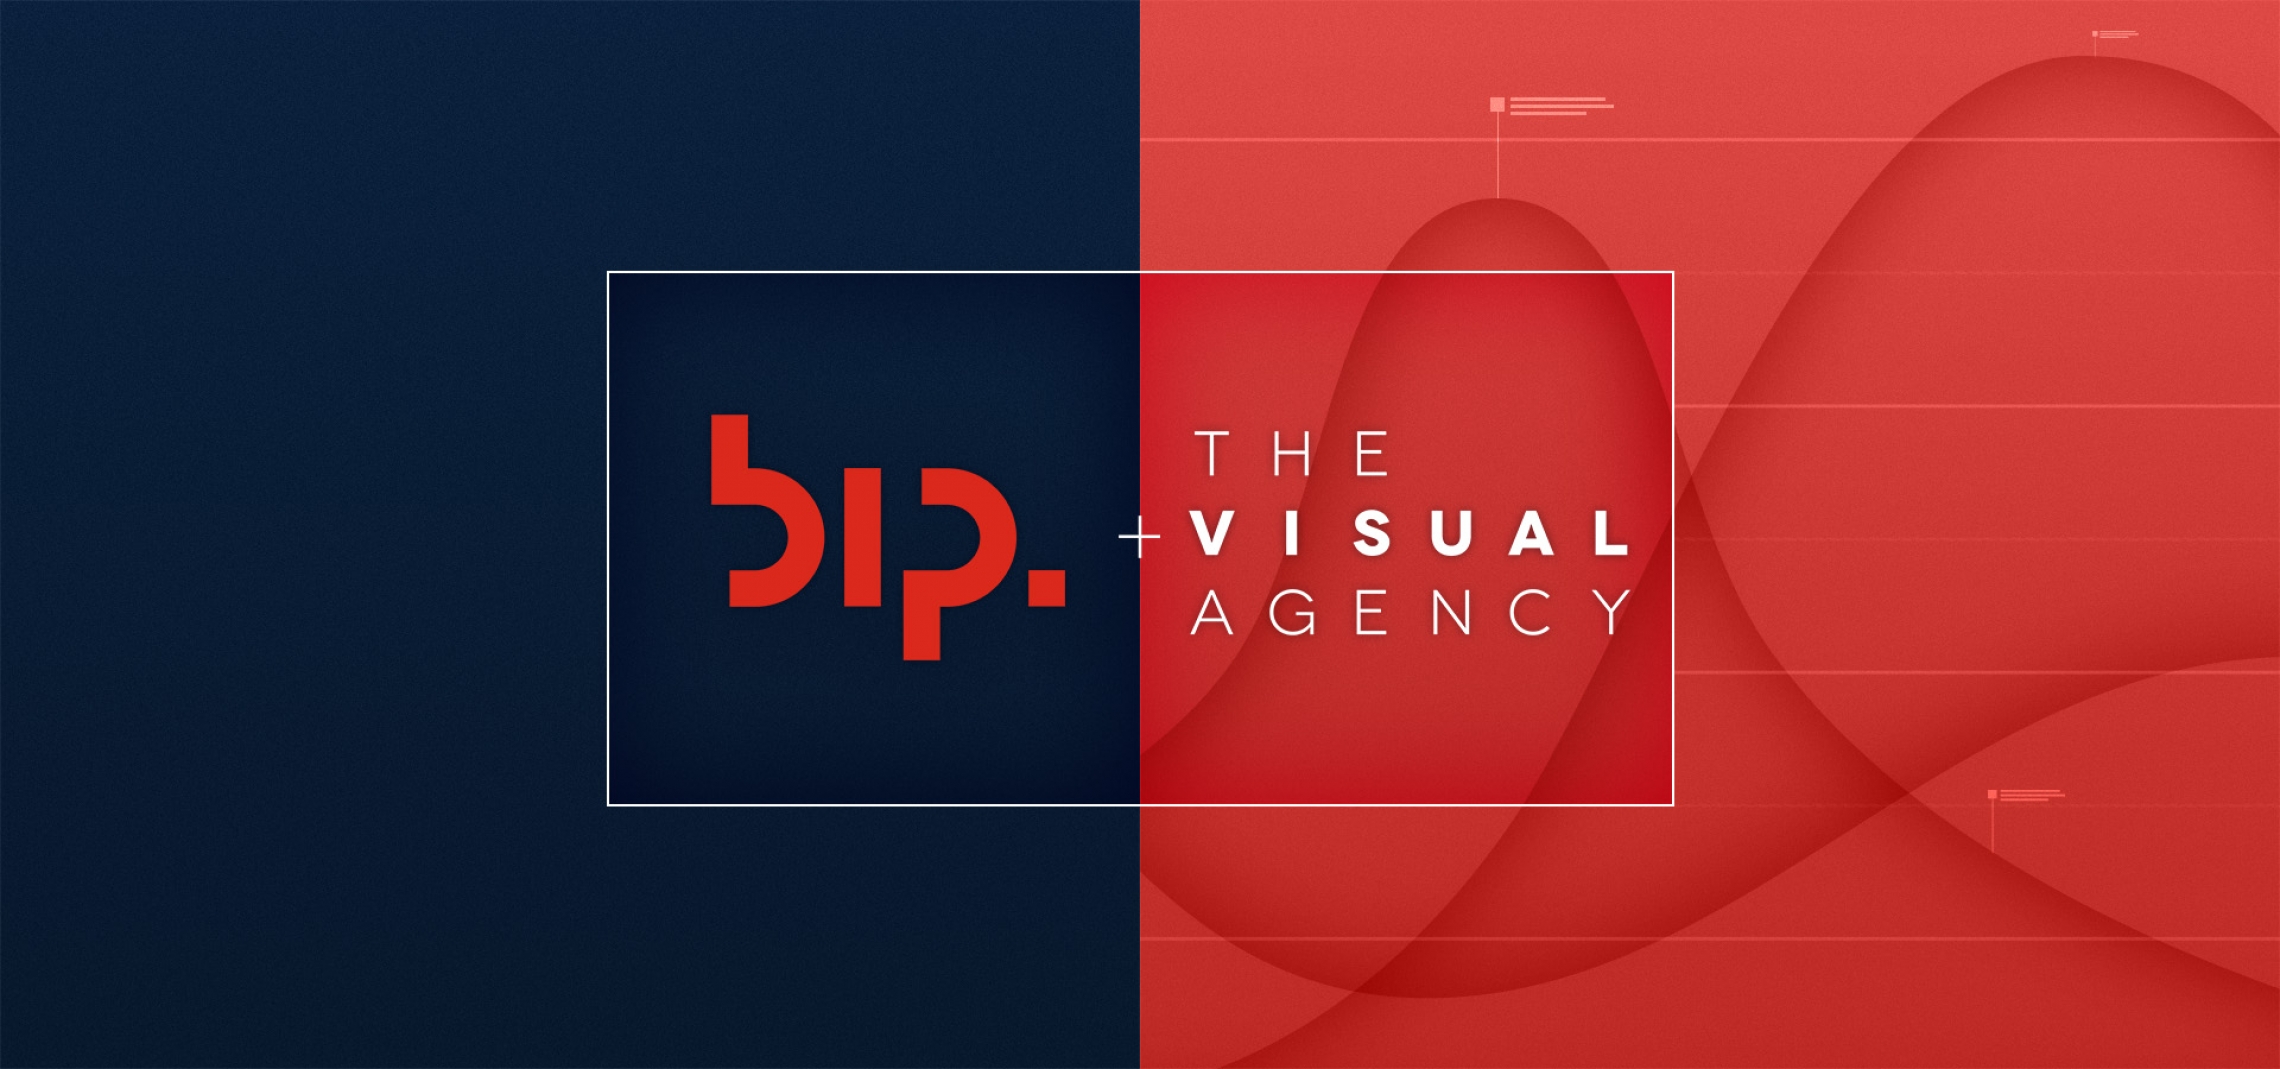 The Visual Agency joins BIP Group